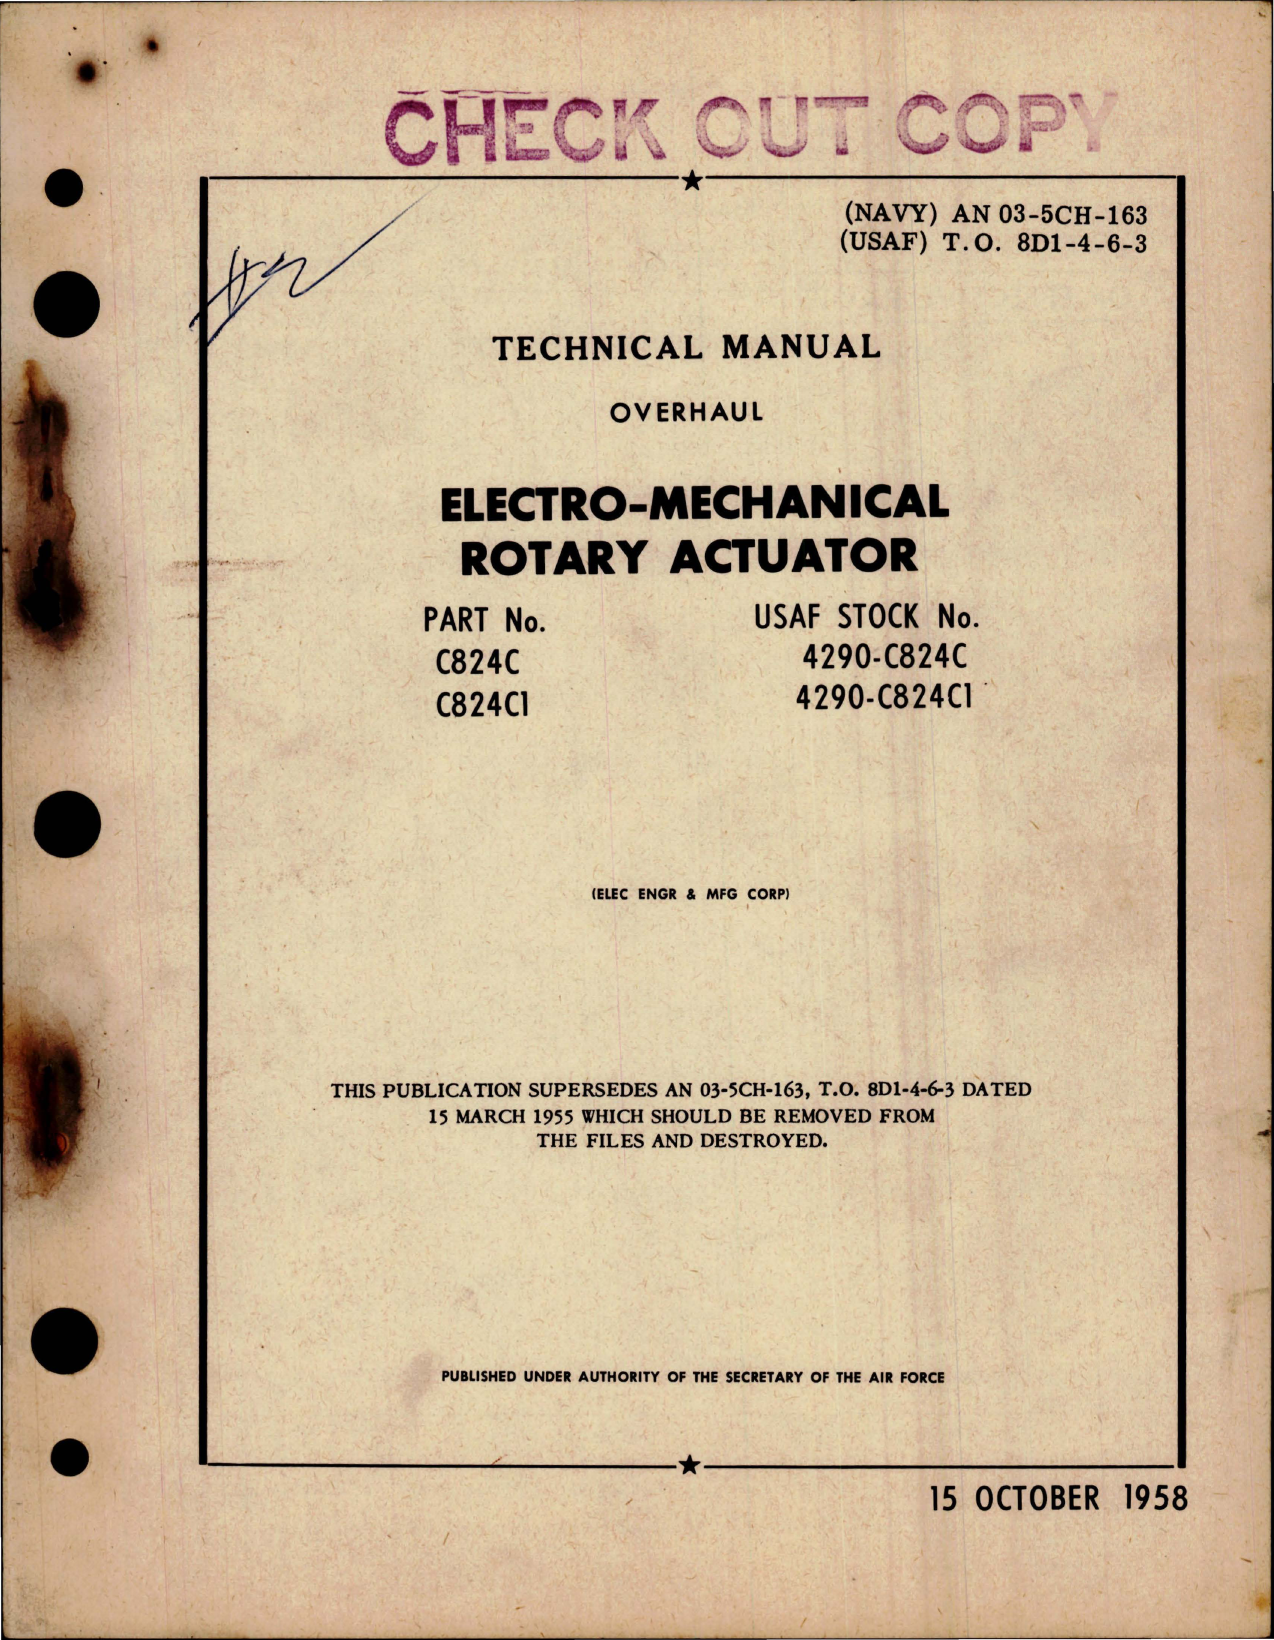 Sample page 1 from AirCorps Library document: Overhaul Manual for Electro-Mechanical Rotary Actuator - Part C824C and C824C1 